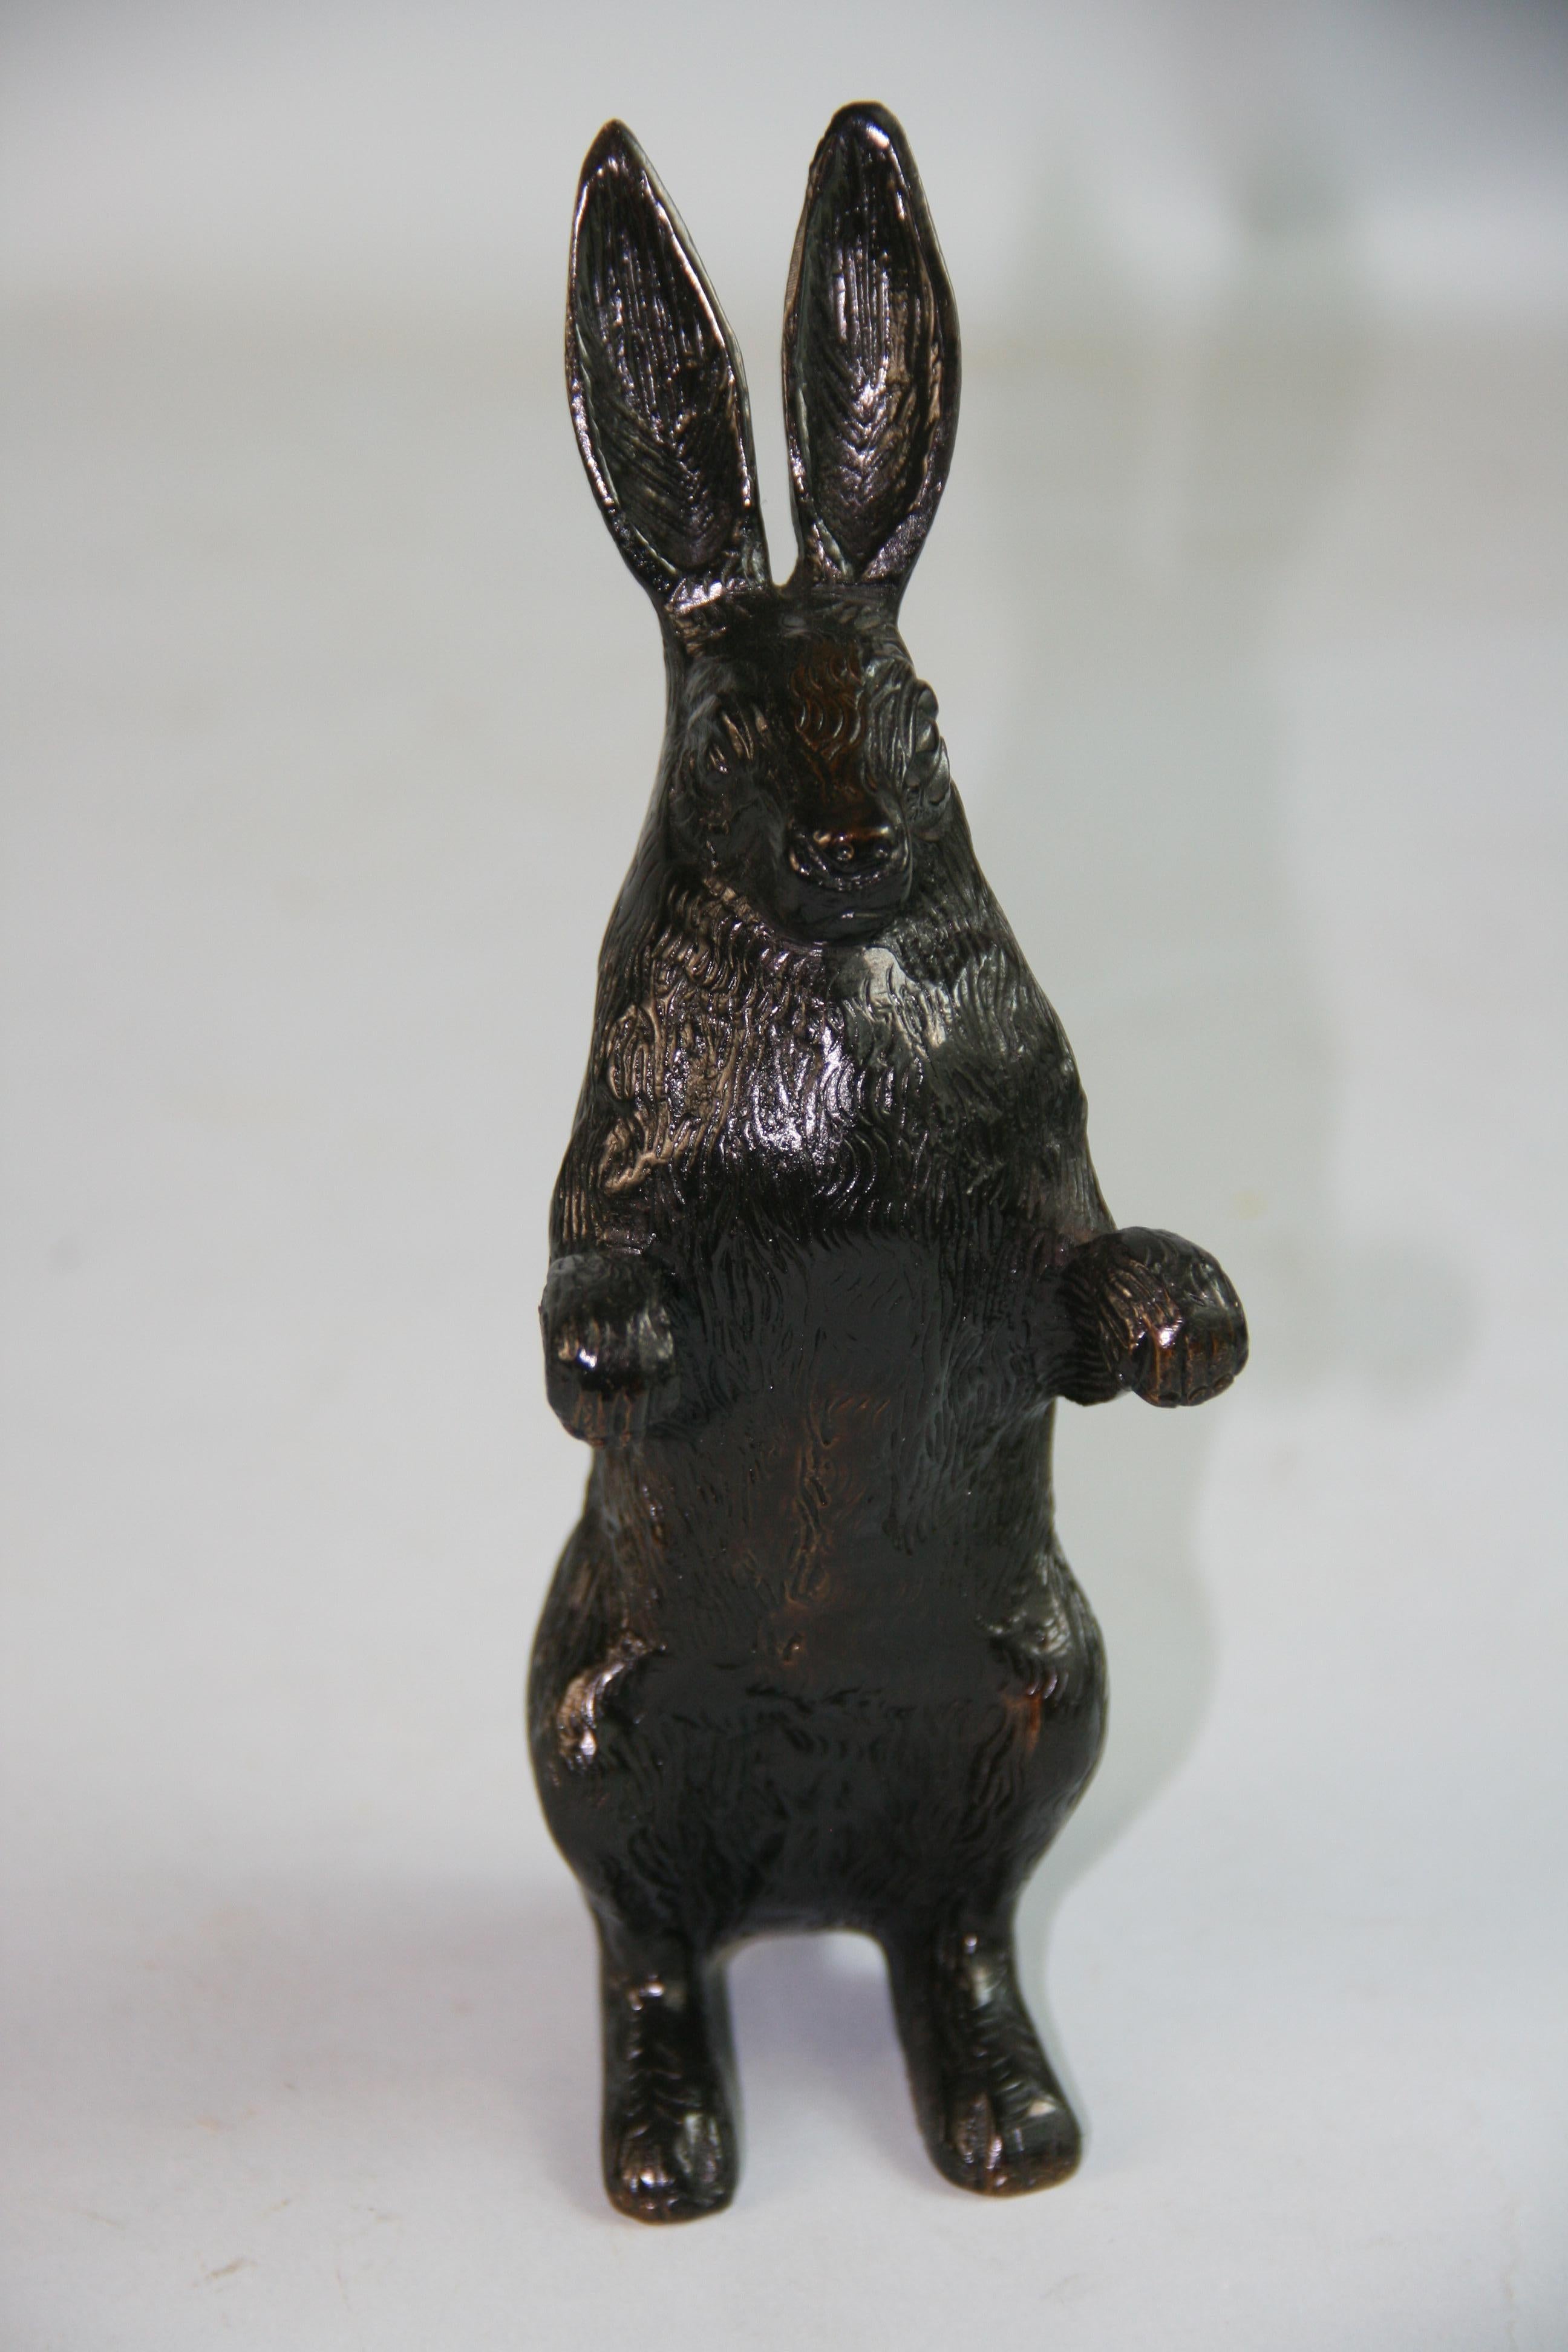 Japanese Vintage  Pair Cast  Bronze  Furry  Rabbits One Standing One Crouching 4